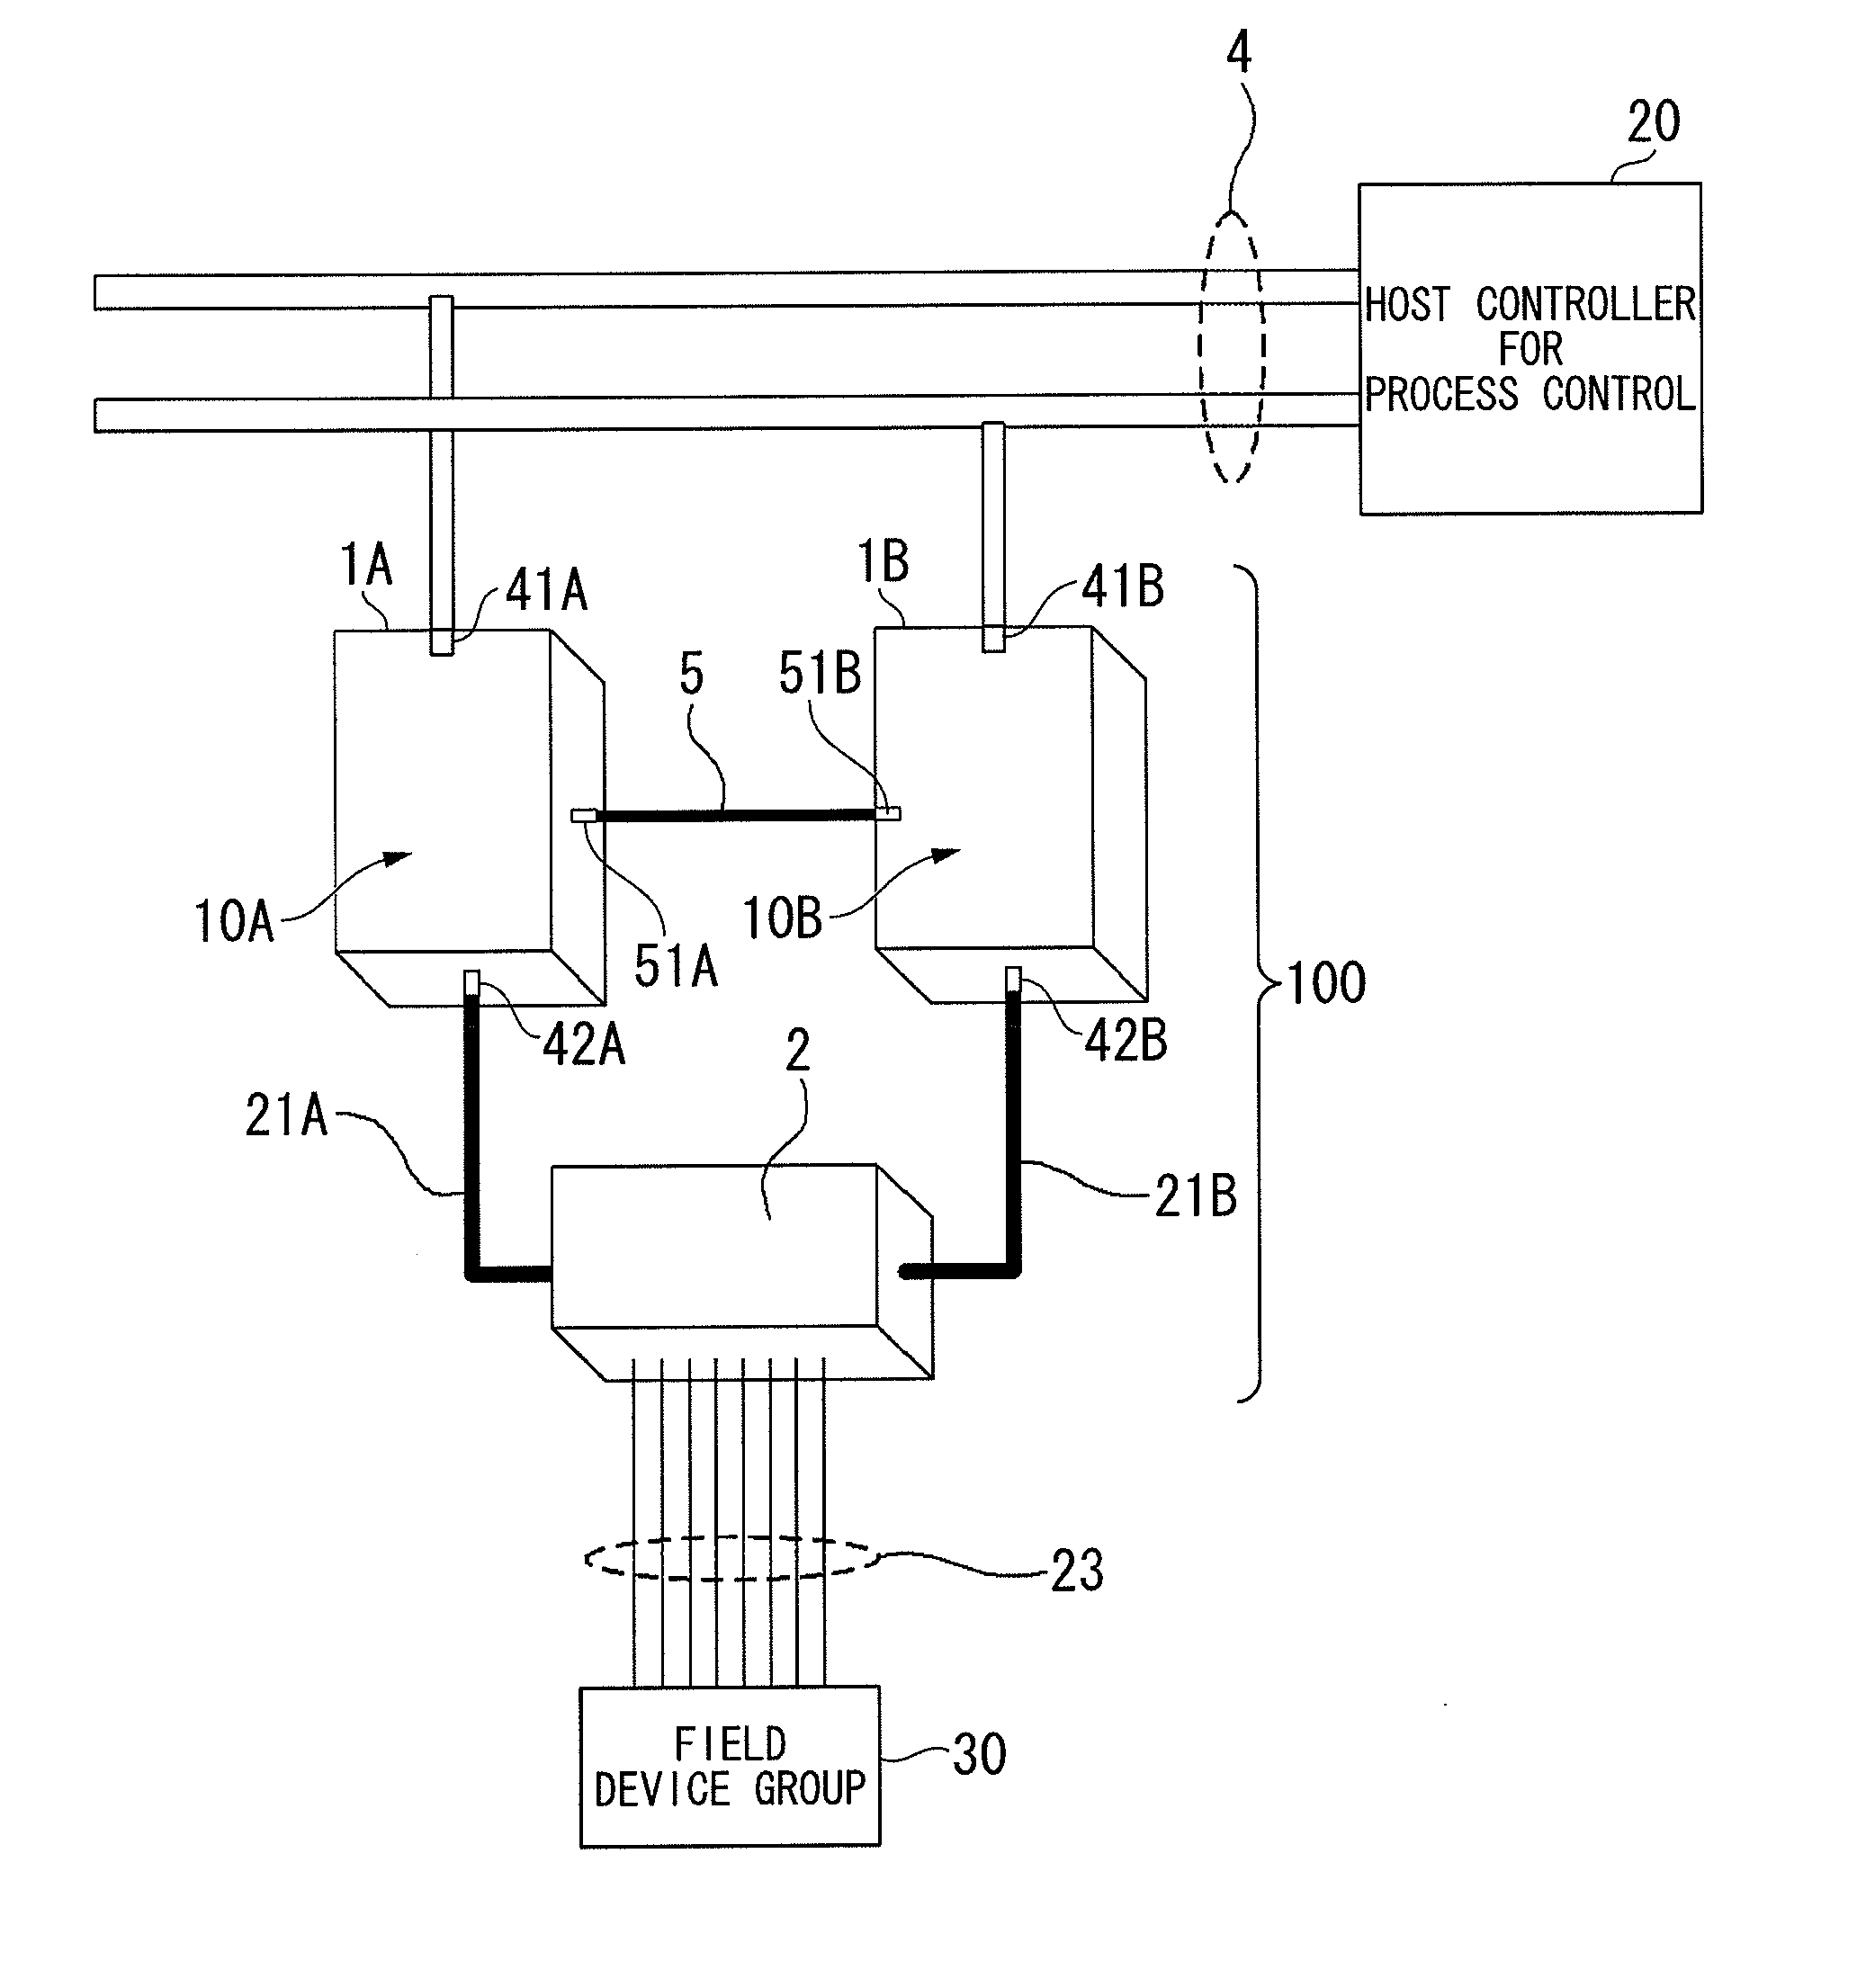 Field communication apparatus and process control system